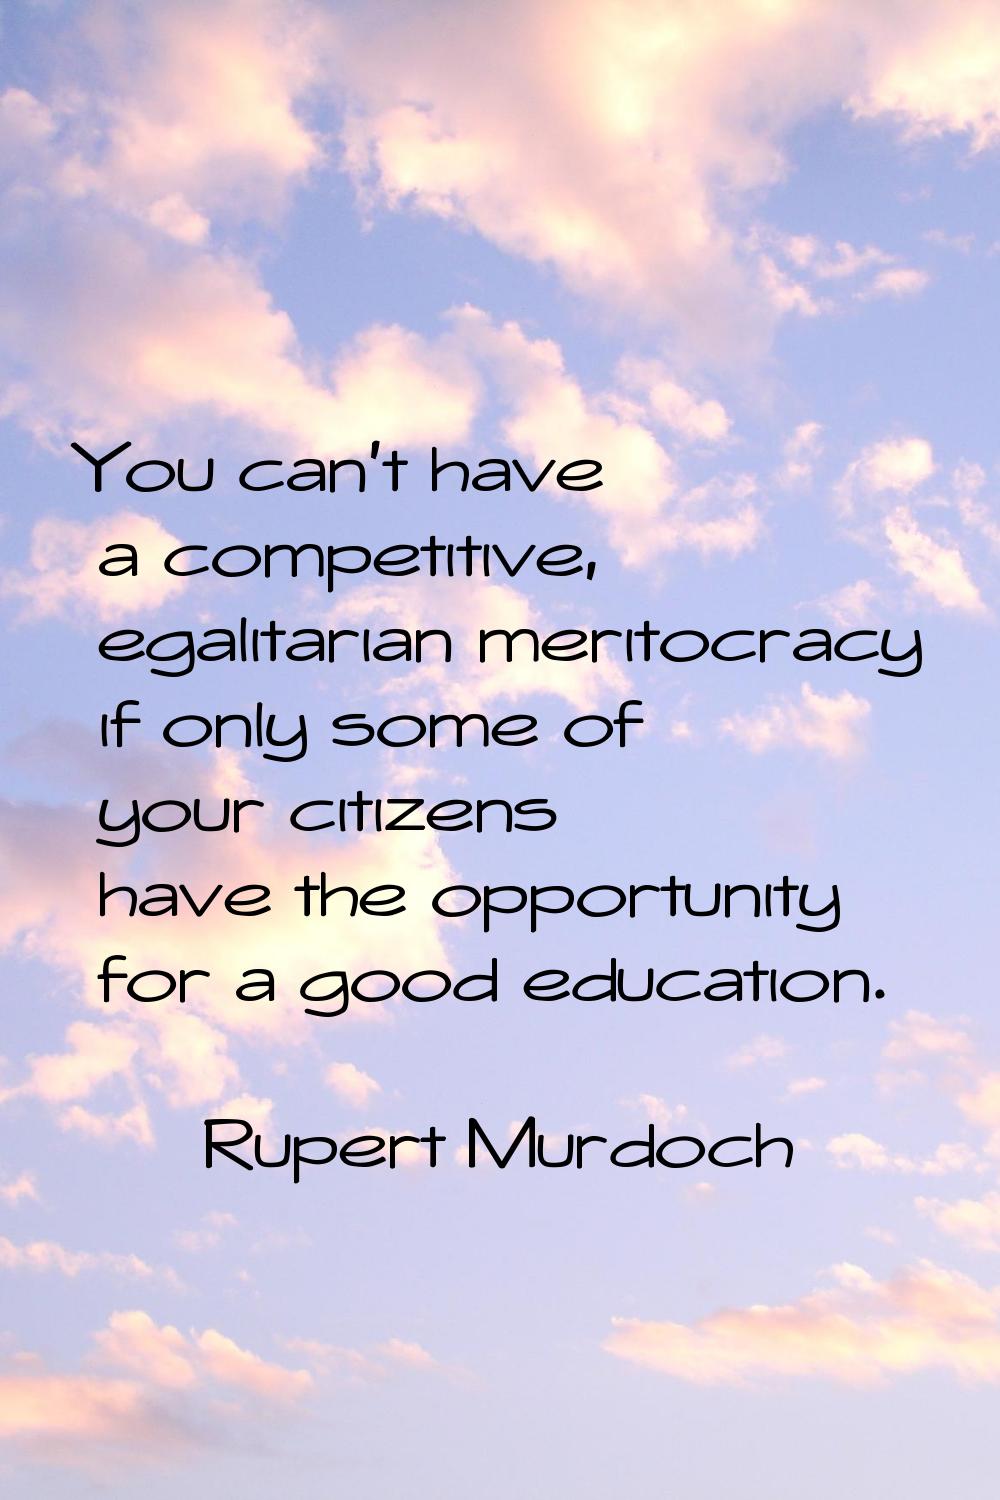 You can't have a competitive, egalitarian meritocracy if only some of your citizens have the opport